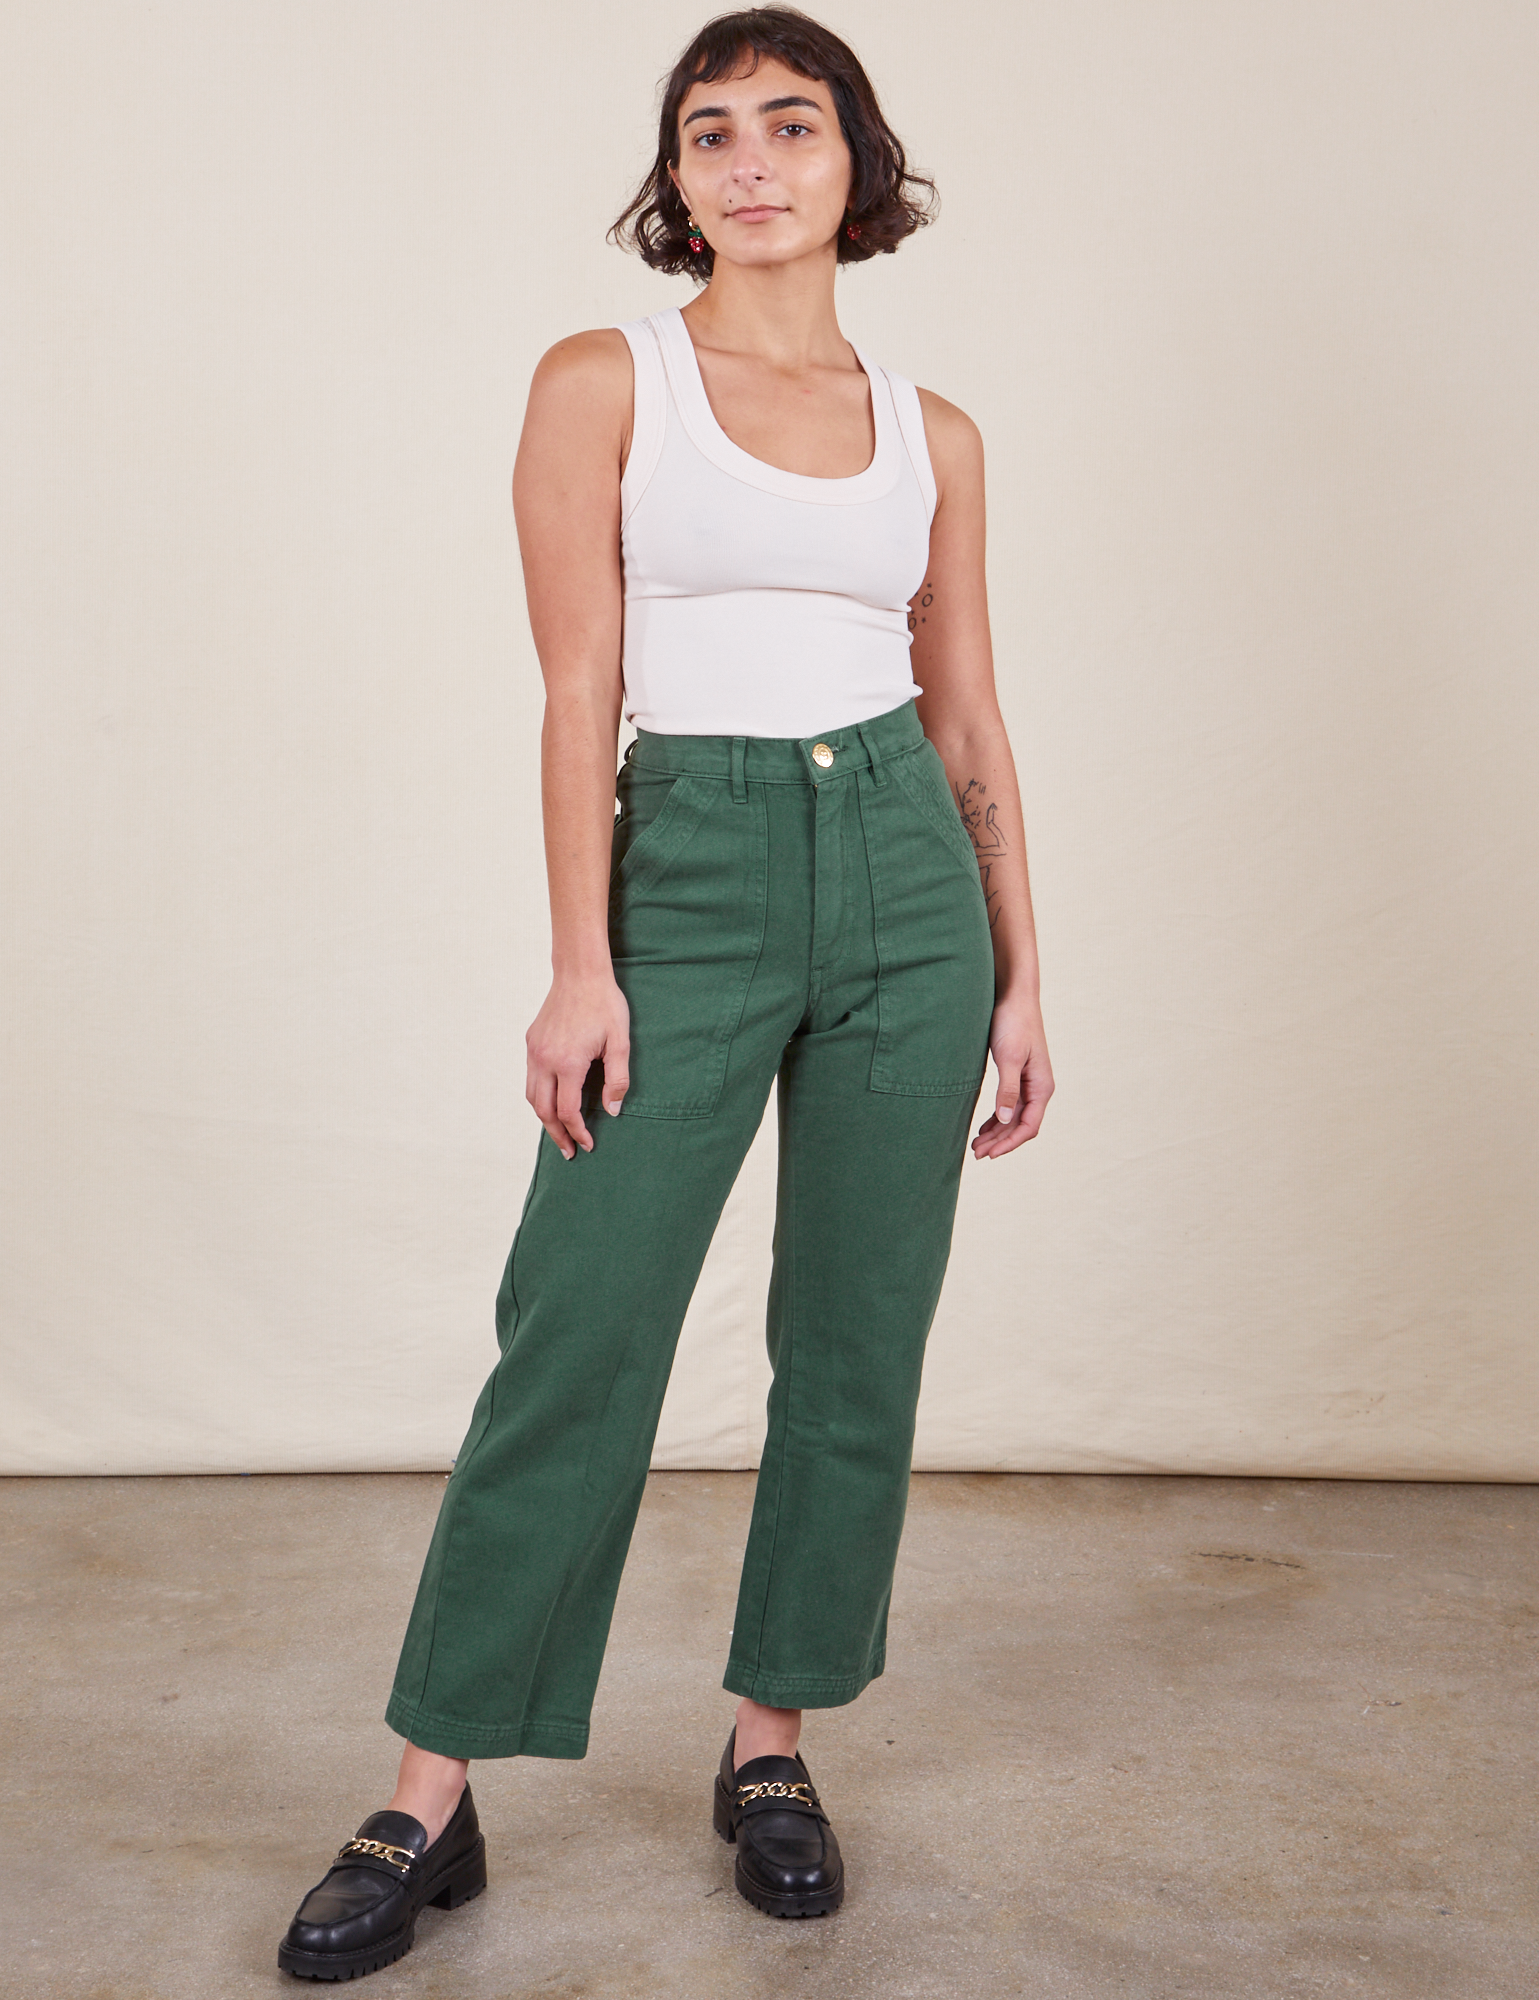 Soraya is 5&#39;2&quot; and wearing Petite XXS Work Pants in Dark Emerald Green paired with vintage off-white Tank Top